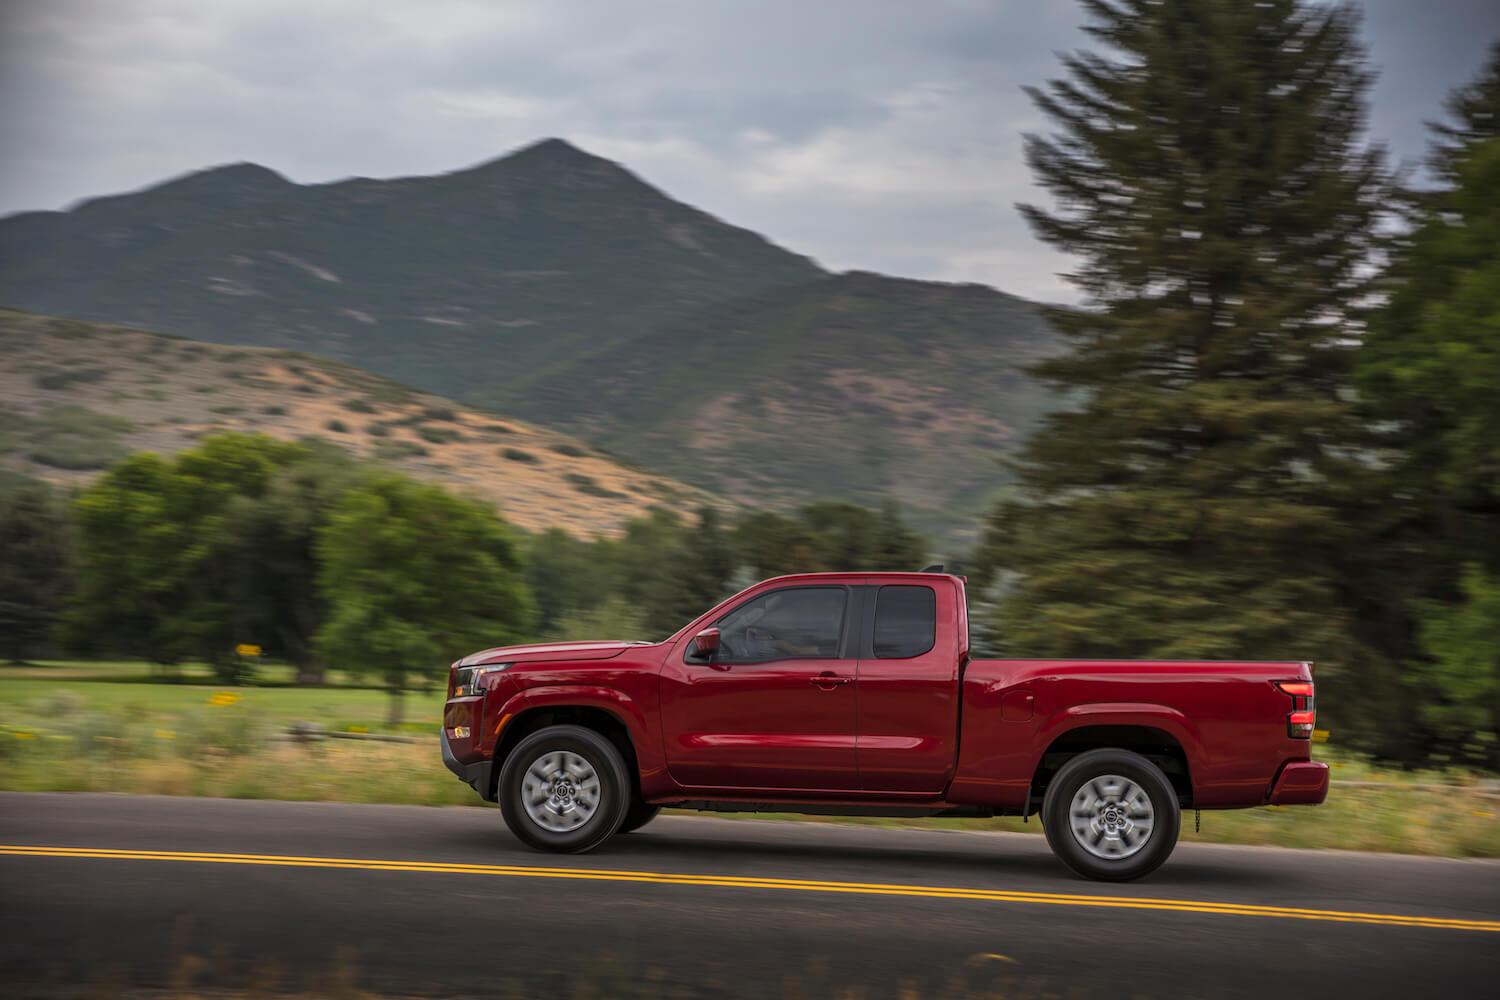 Side view of a red Nissan Titan mid-size pickup truck driving in front of a mountain range.